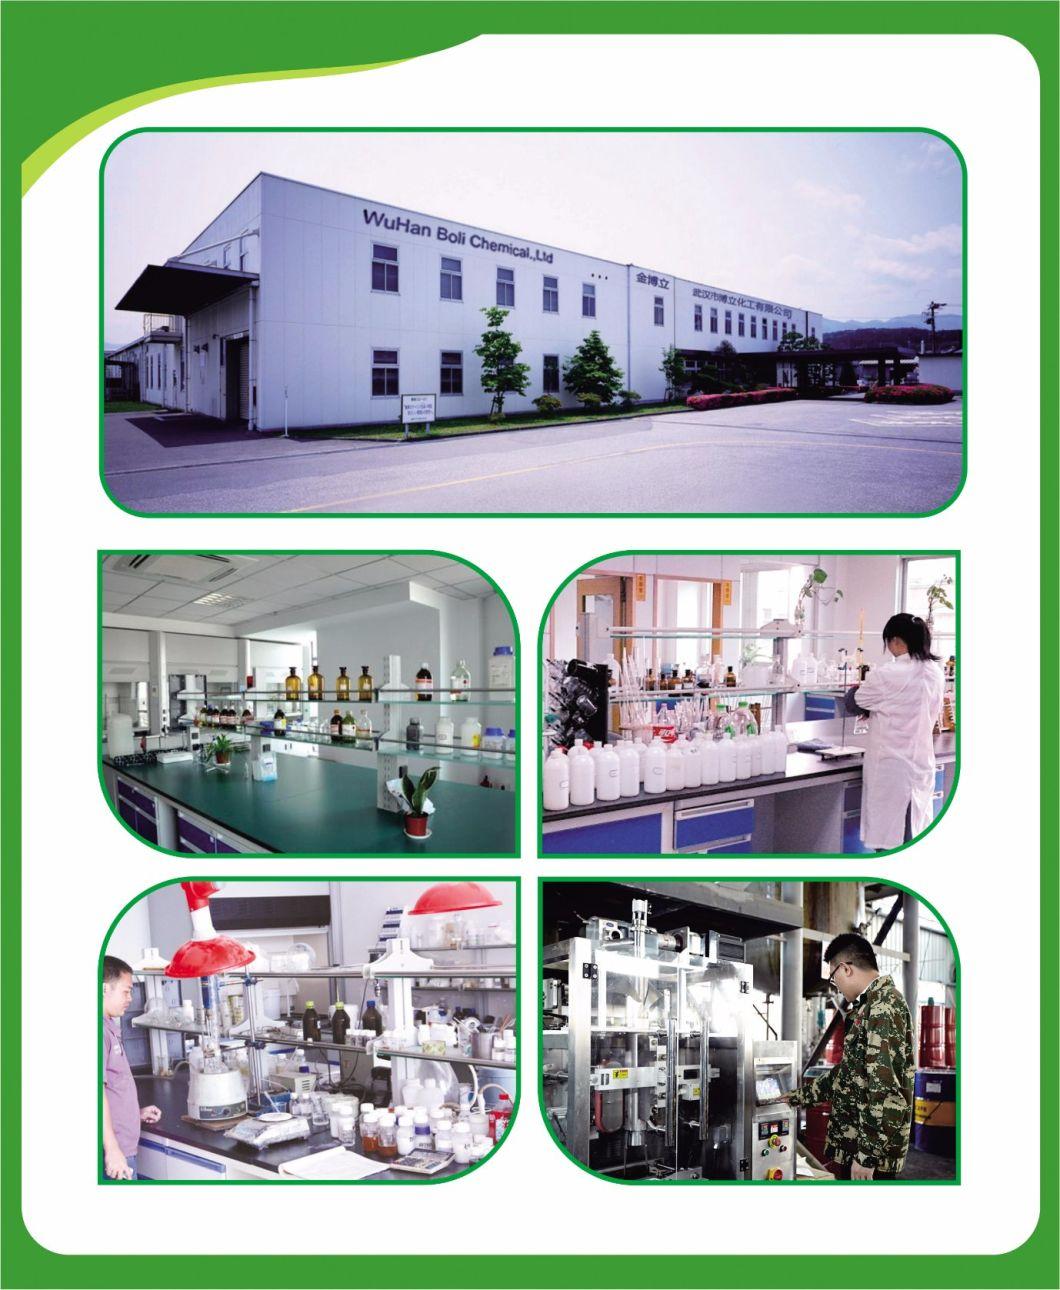 China Supplier GBL Used for Leather Sponge Fabric High Solid Content No Odor Spray Glue